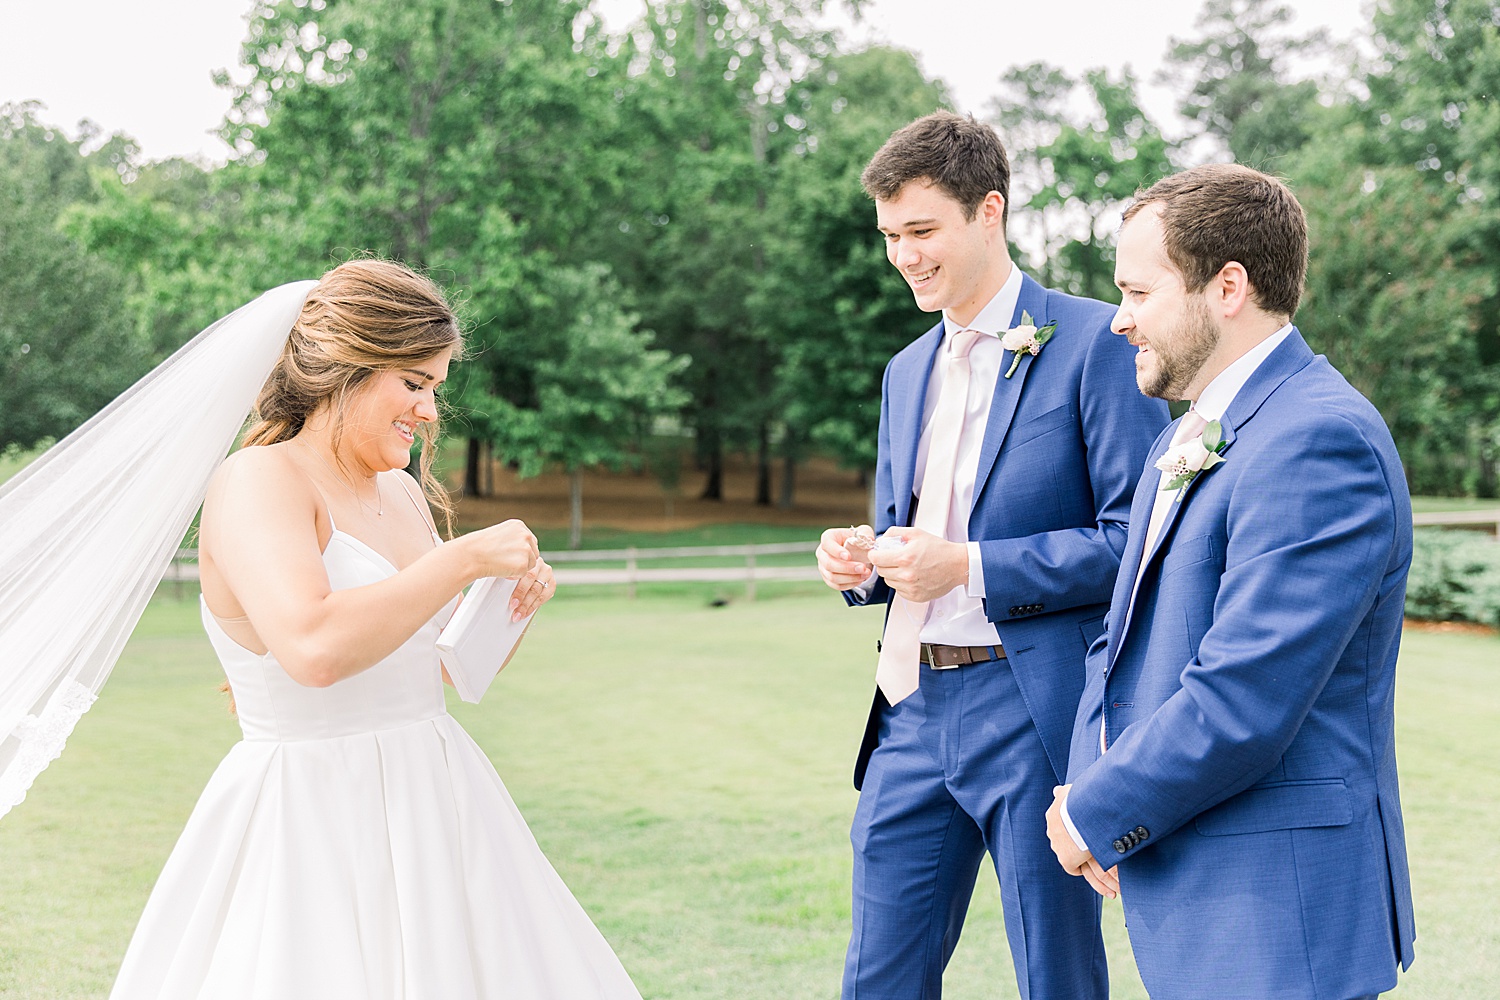 Brothers give gifts to their sister before Wedding ceremony at The Barn at Shady Lane in Birmingham, AL